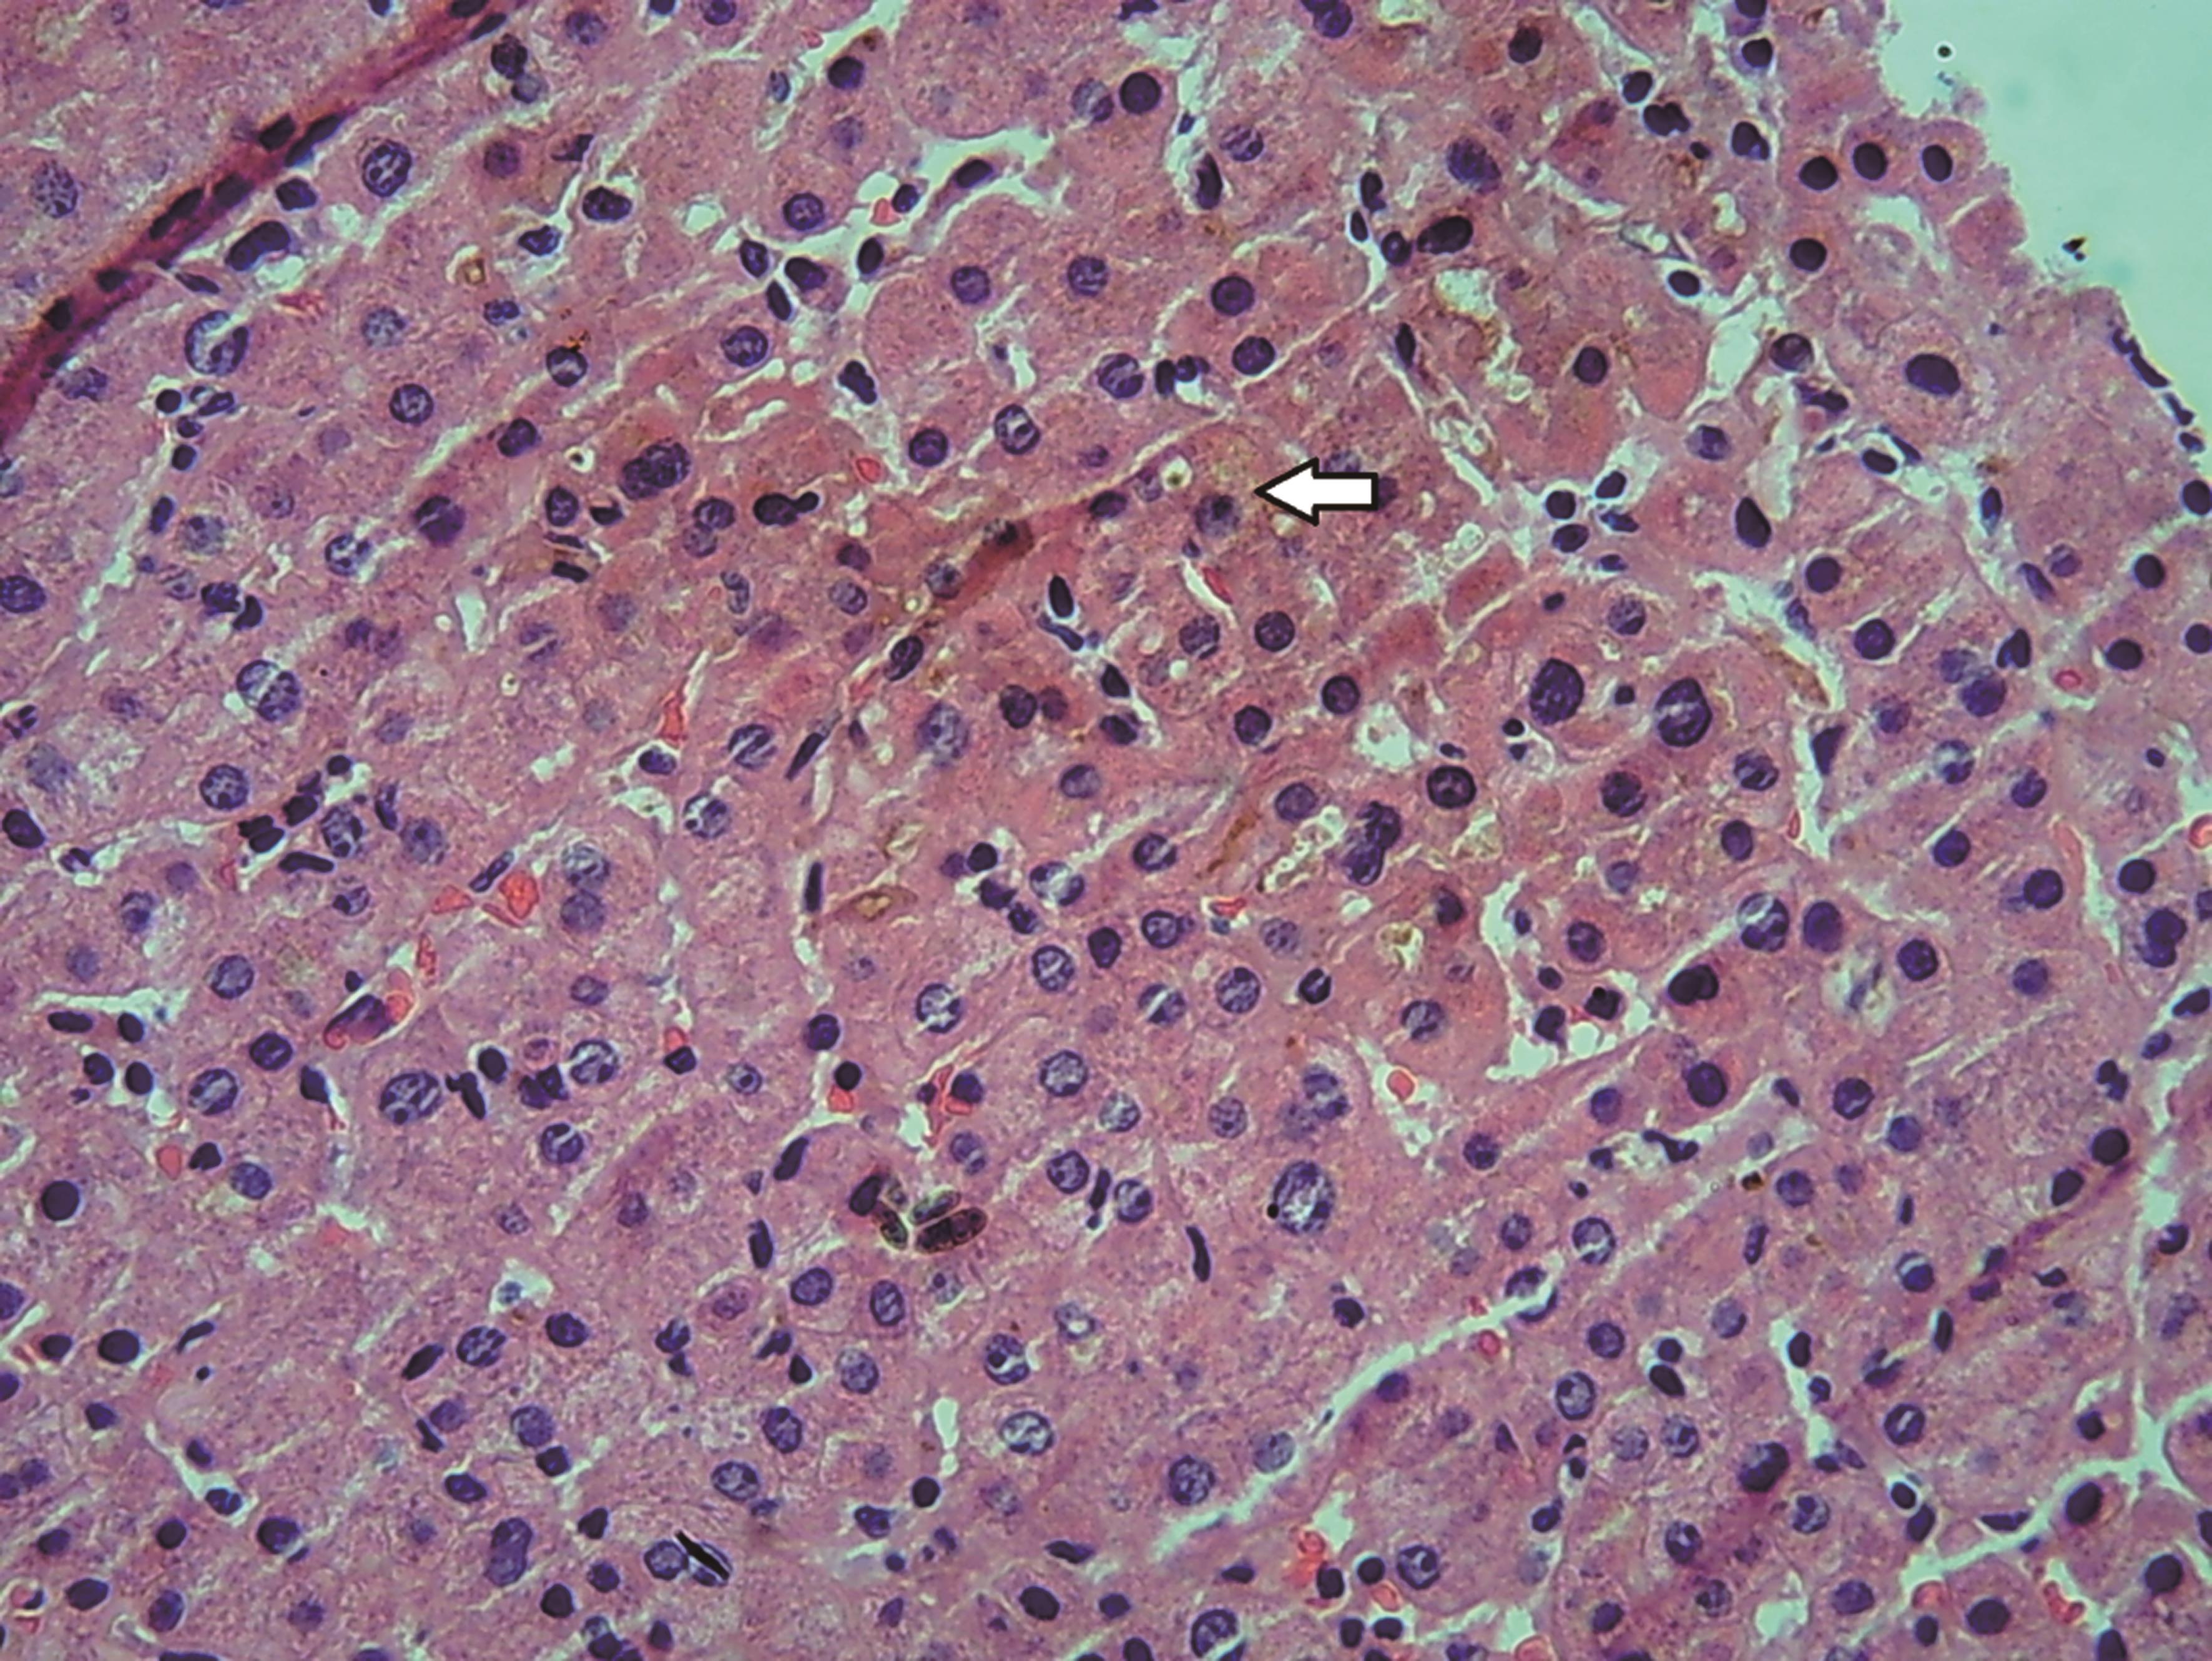 Liver biopsy with a high-power view of moderate hepatocellular cholestasis (white arrow) with bilirubinostasis.